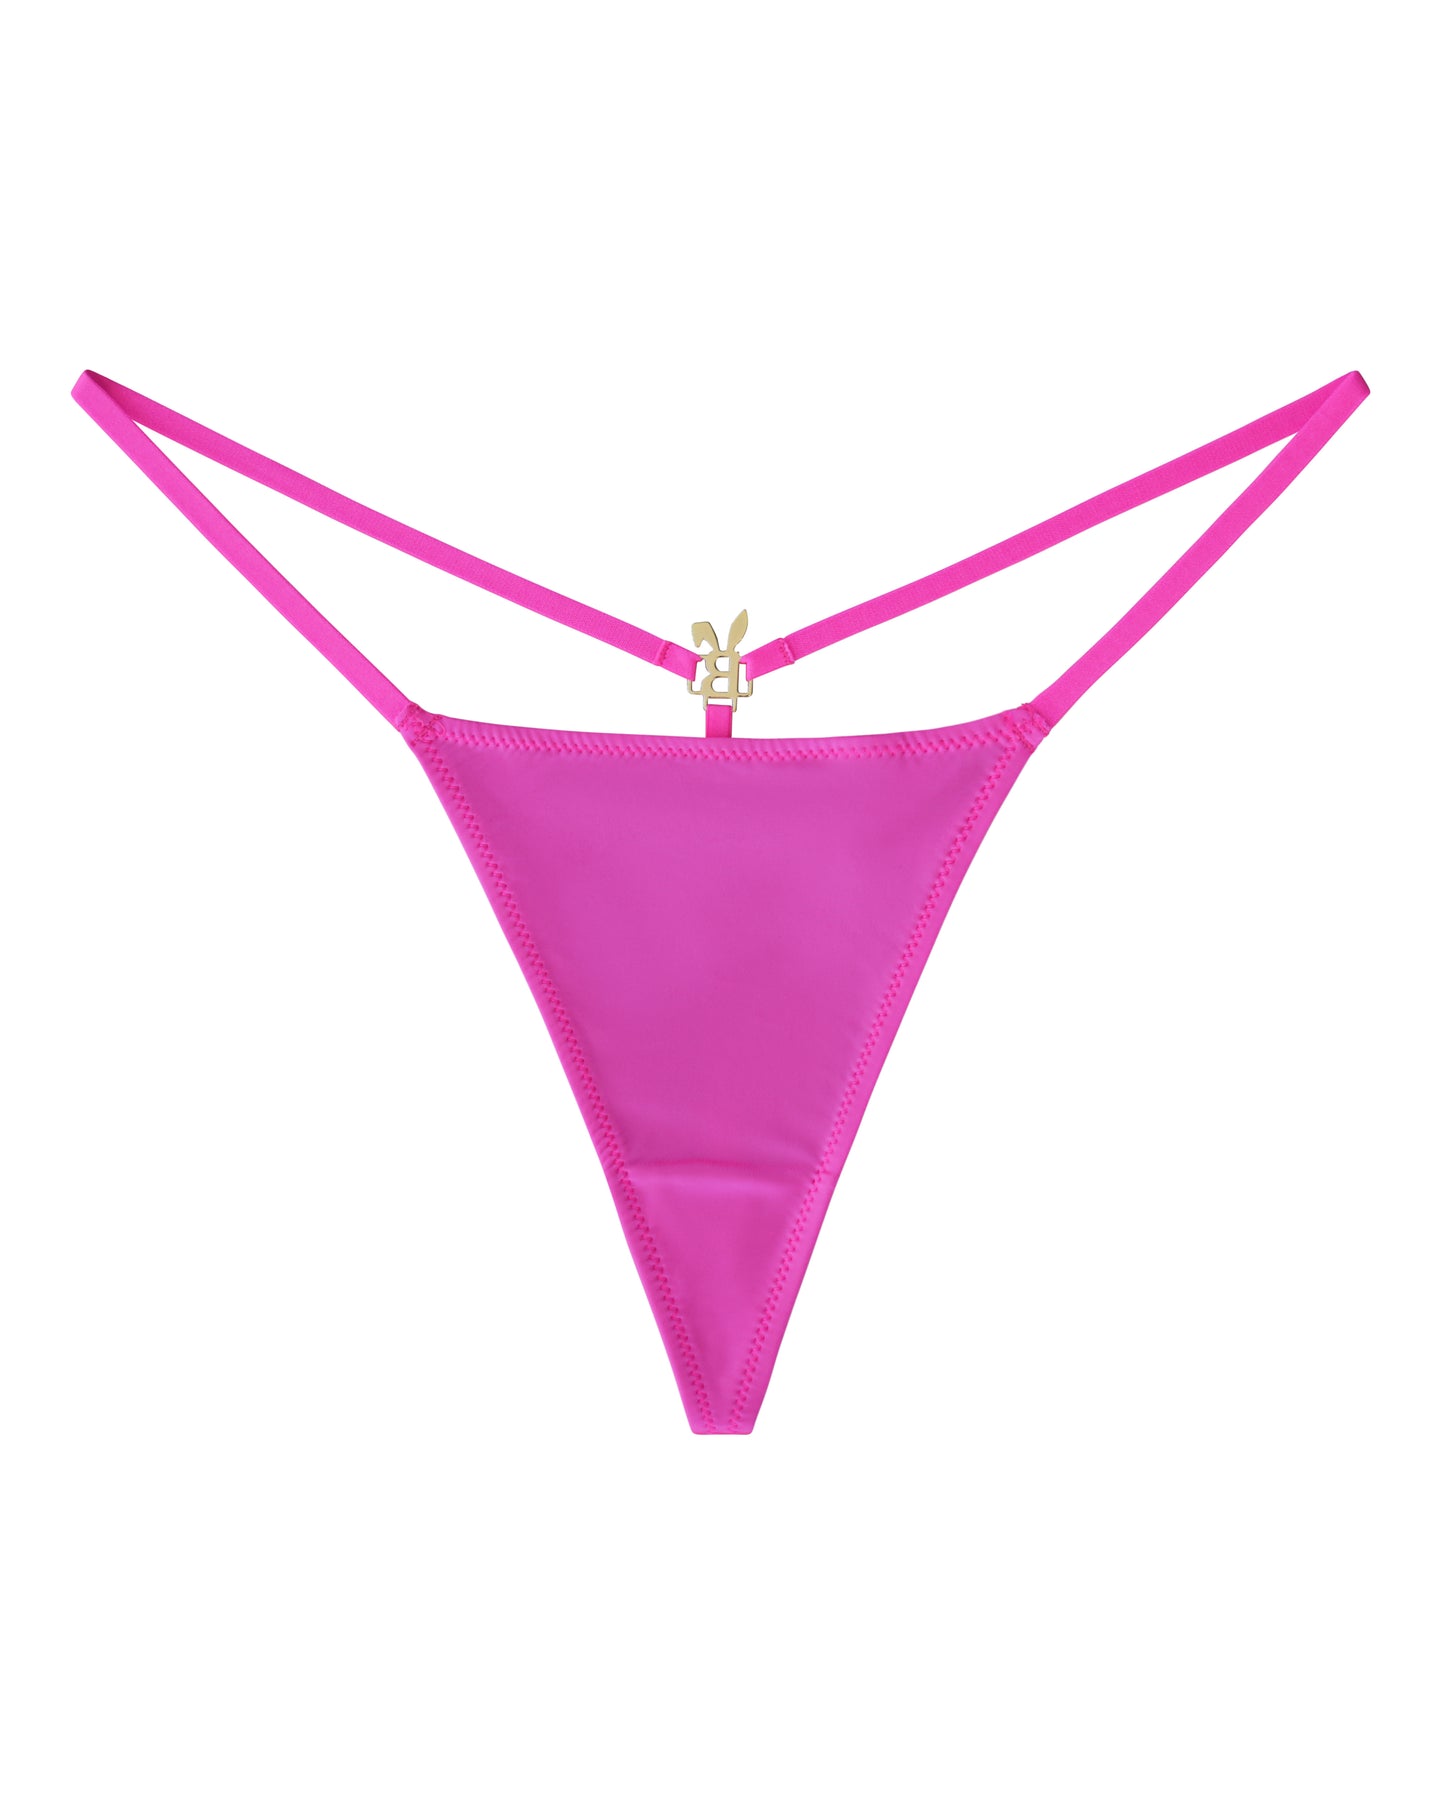 BUNNY G-STRING THONG IN HOT PINK - BUNNIES' ROOM